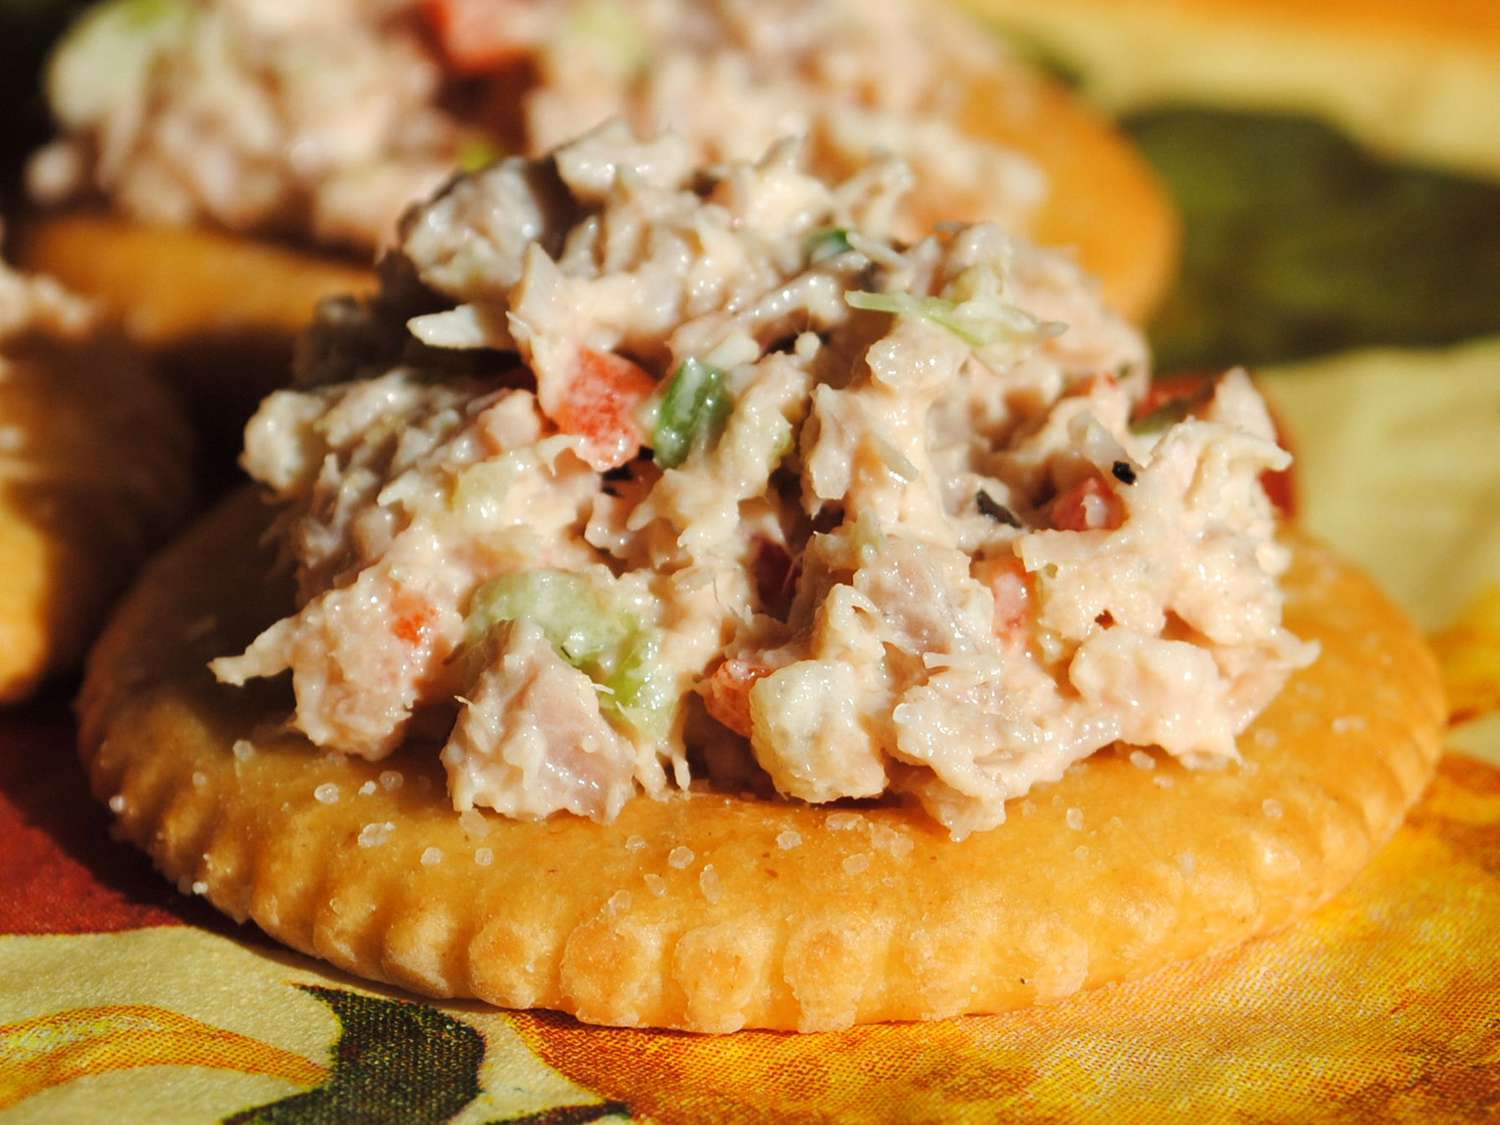 Close up view of Turkey Salad on crackers